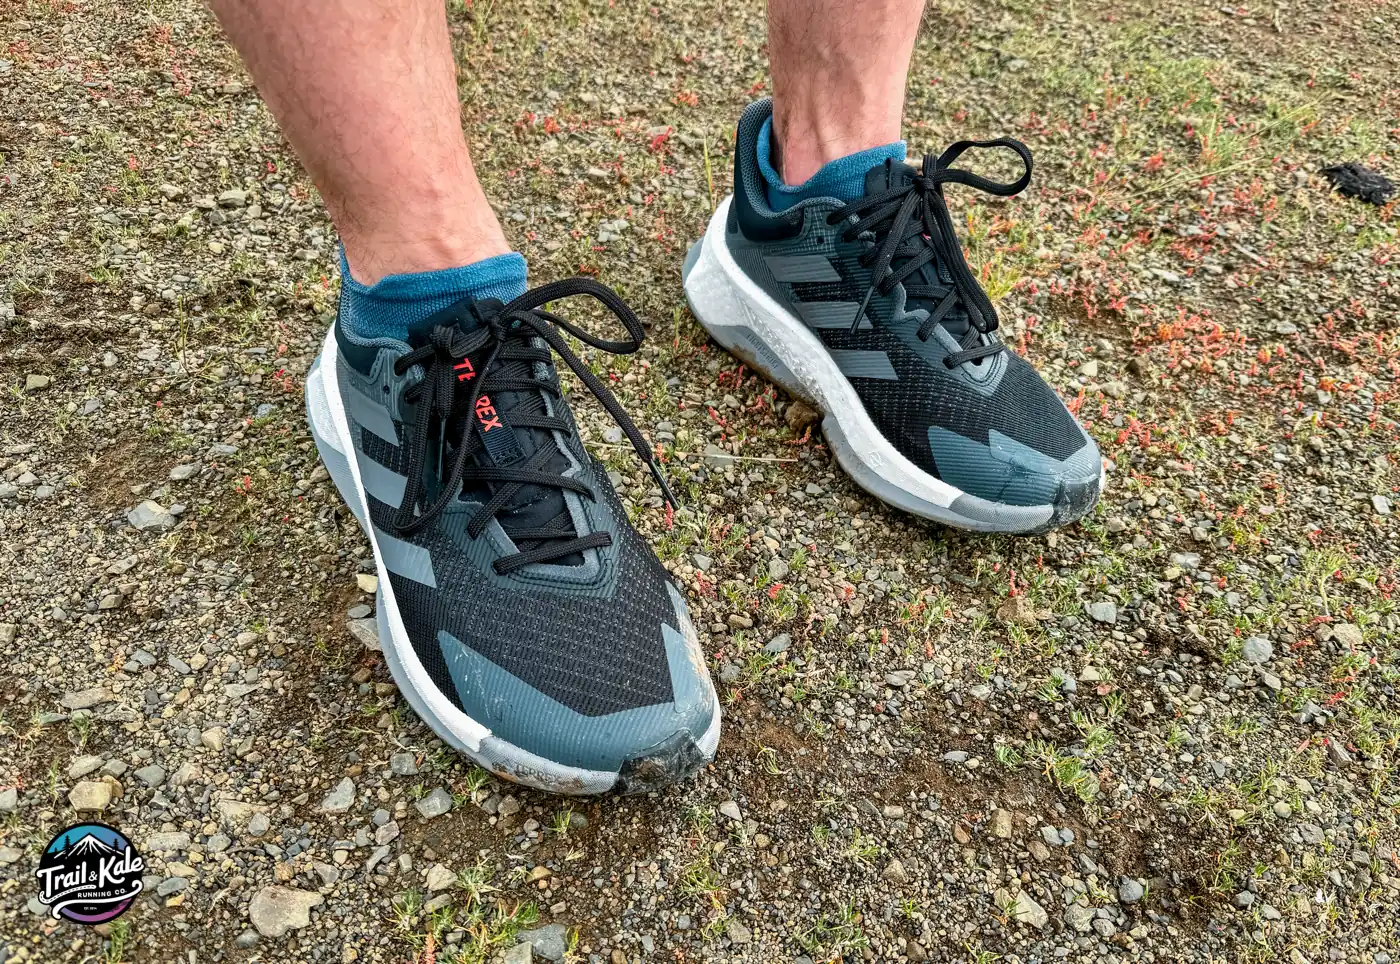 Adidas Soulstride Ultra Review | Trail & Kale Running Co.